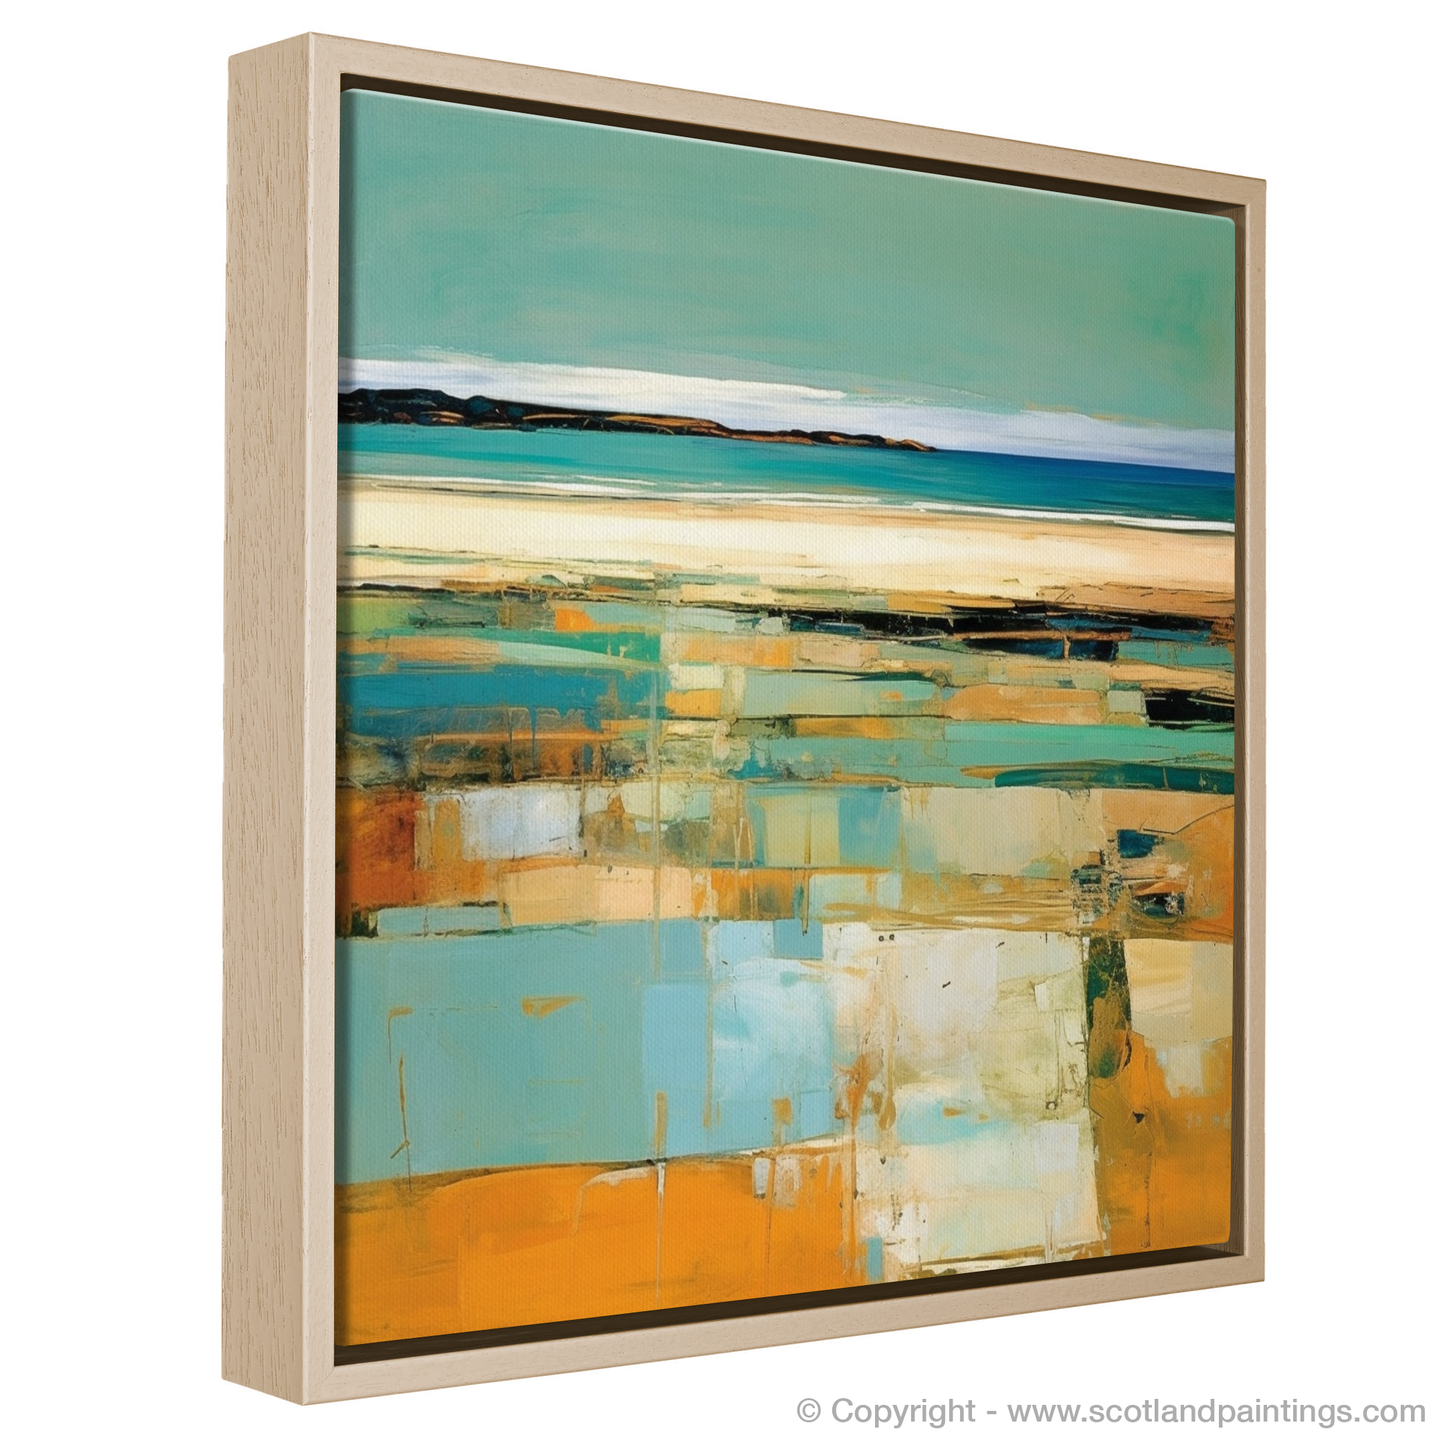 Gullane Beach Reverie: An Abstract Impressionist Exploration